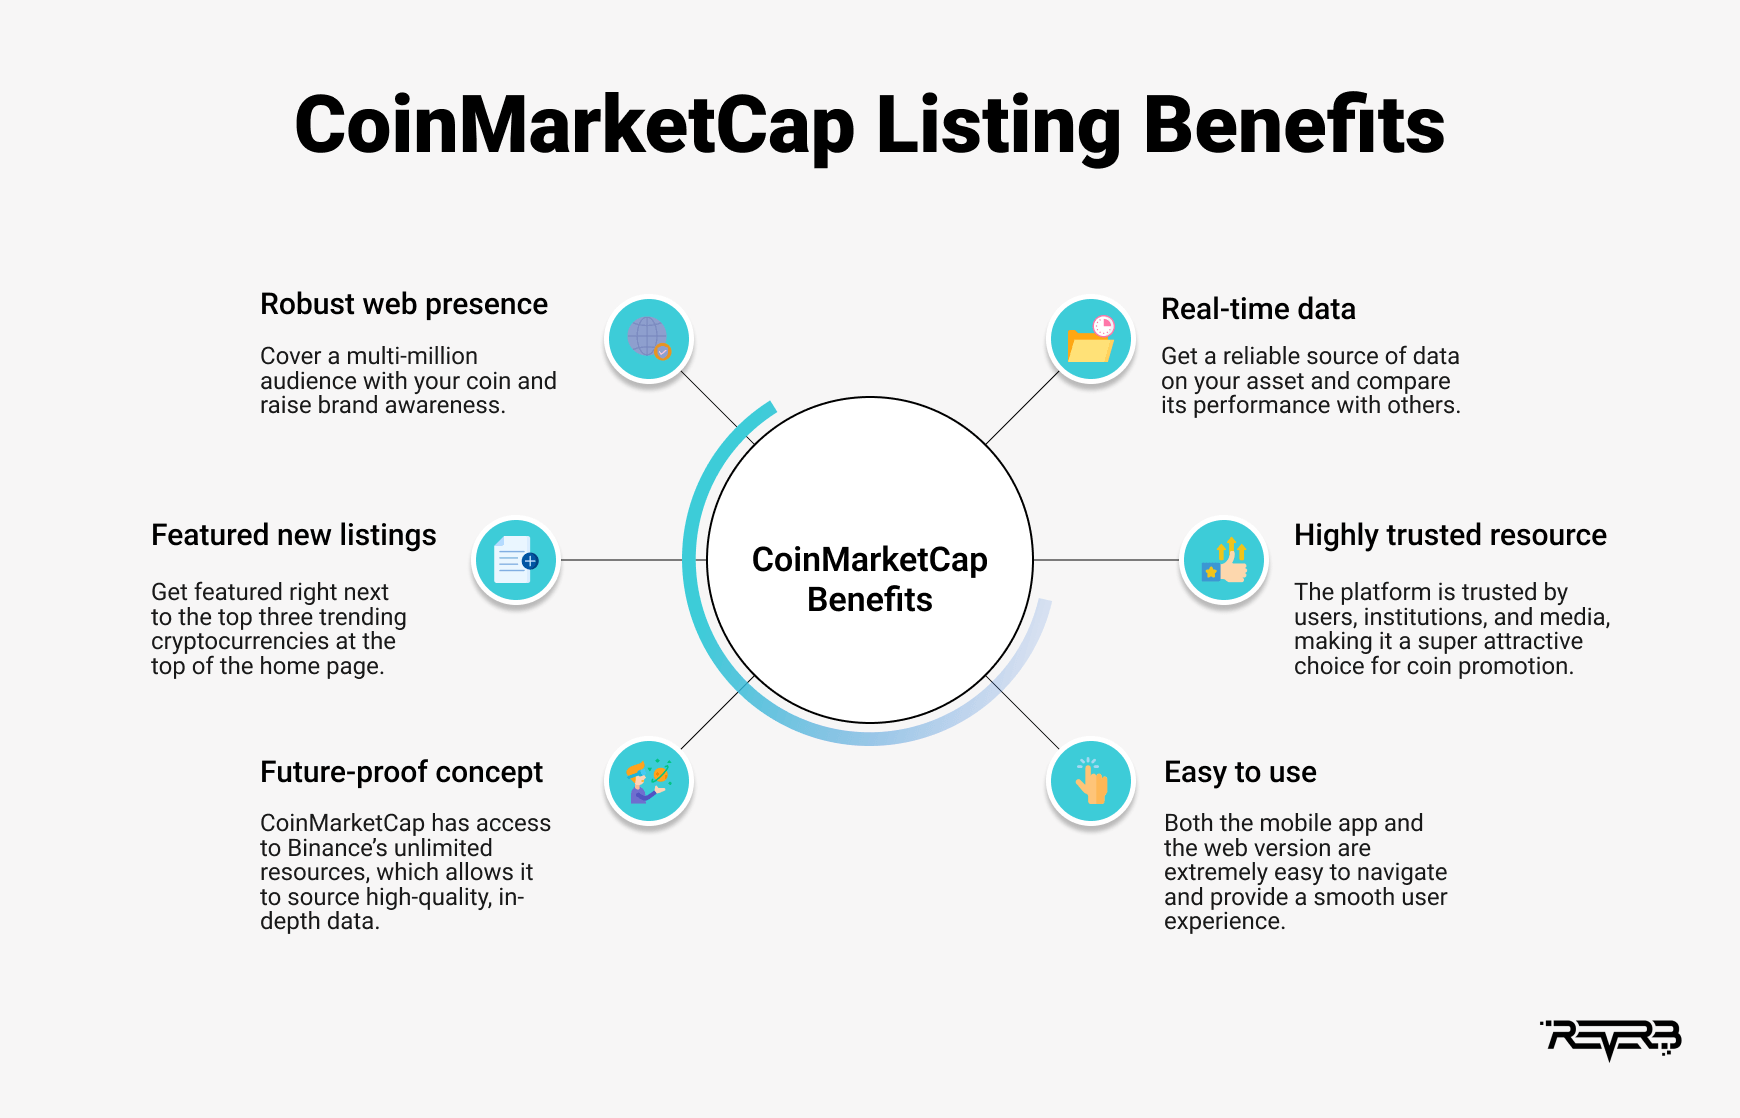 View The Full Upcoming ICO List With Initial Coin Offerings Launching Soon | CoinMarketCap